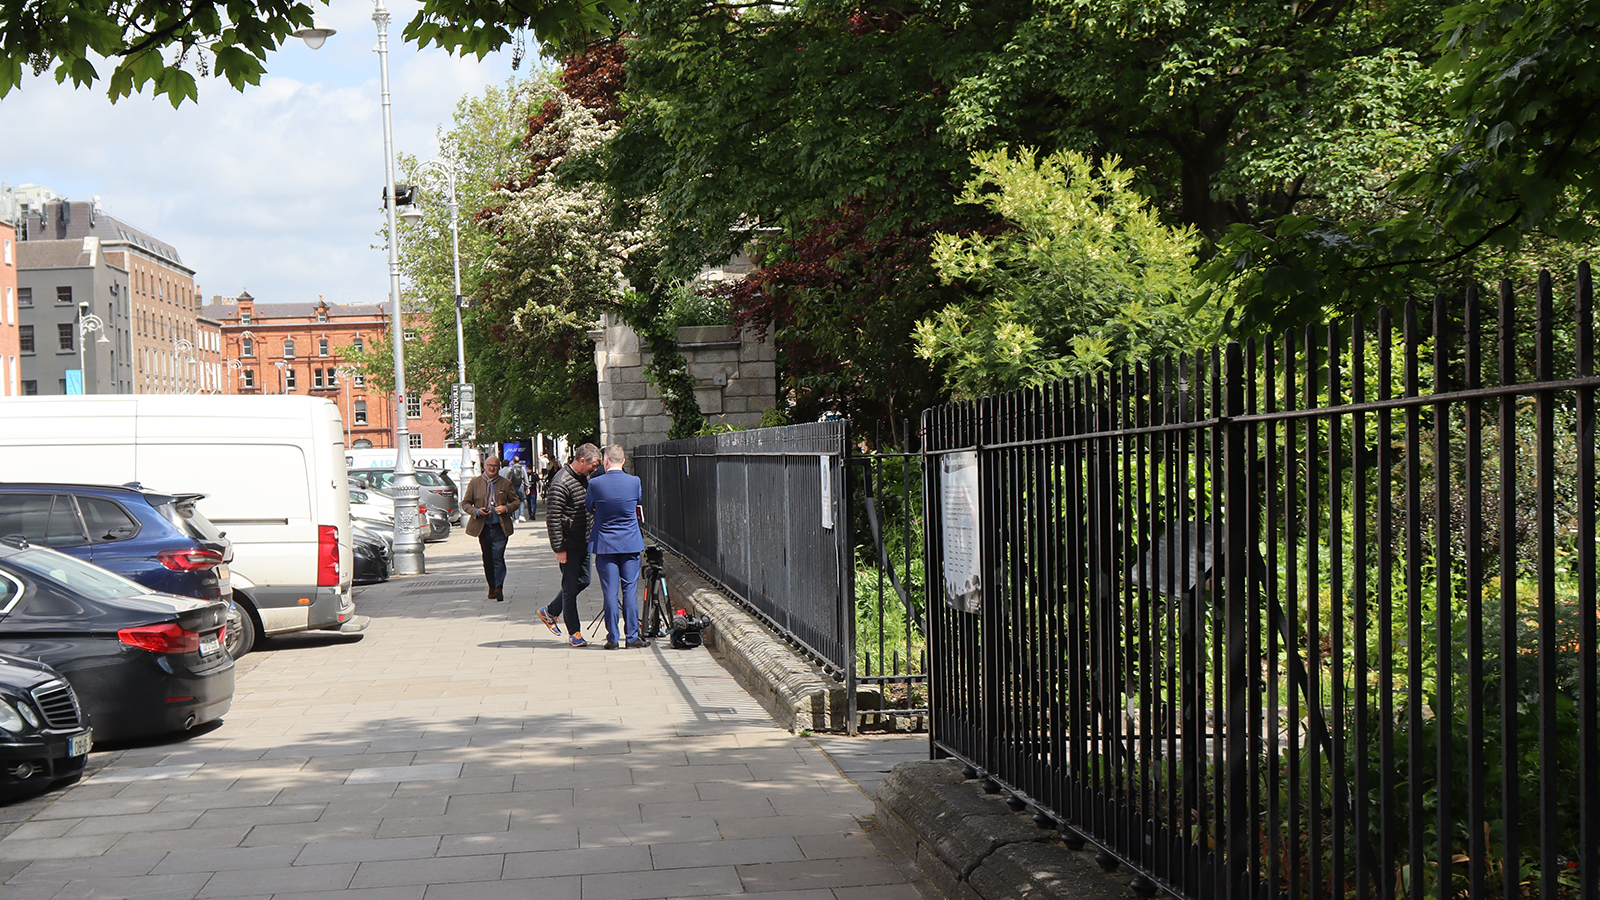 Entrance to Merrion Square